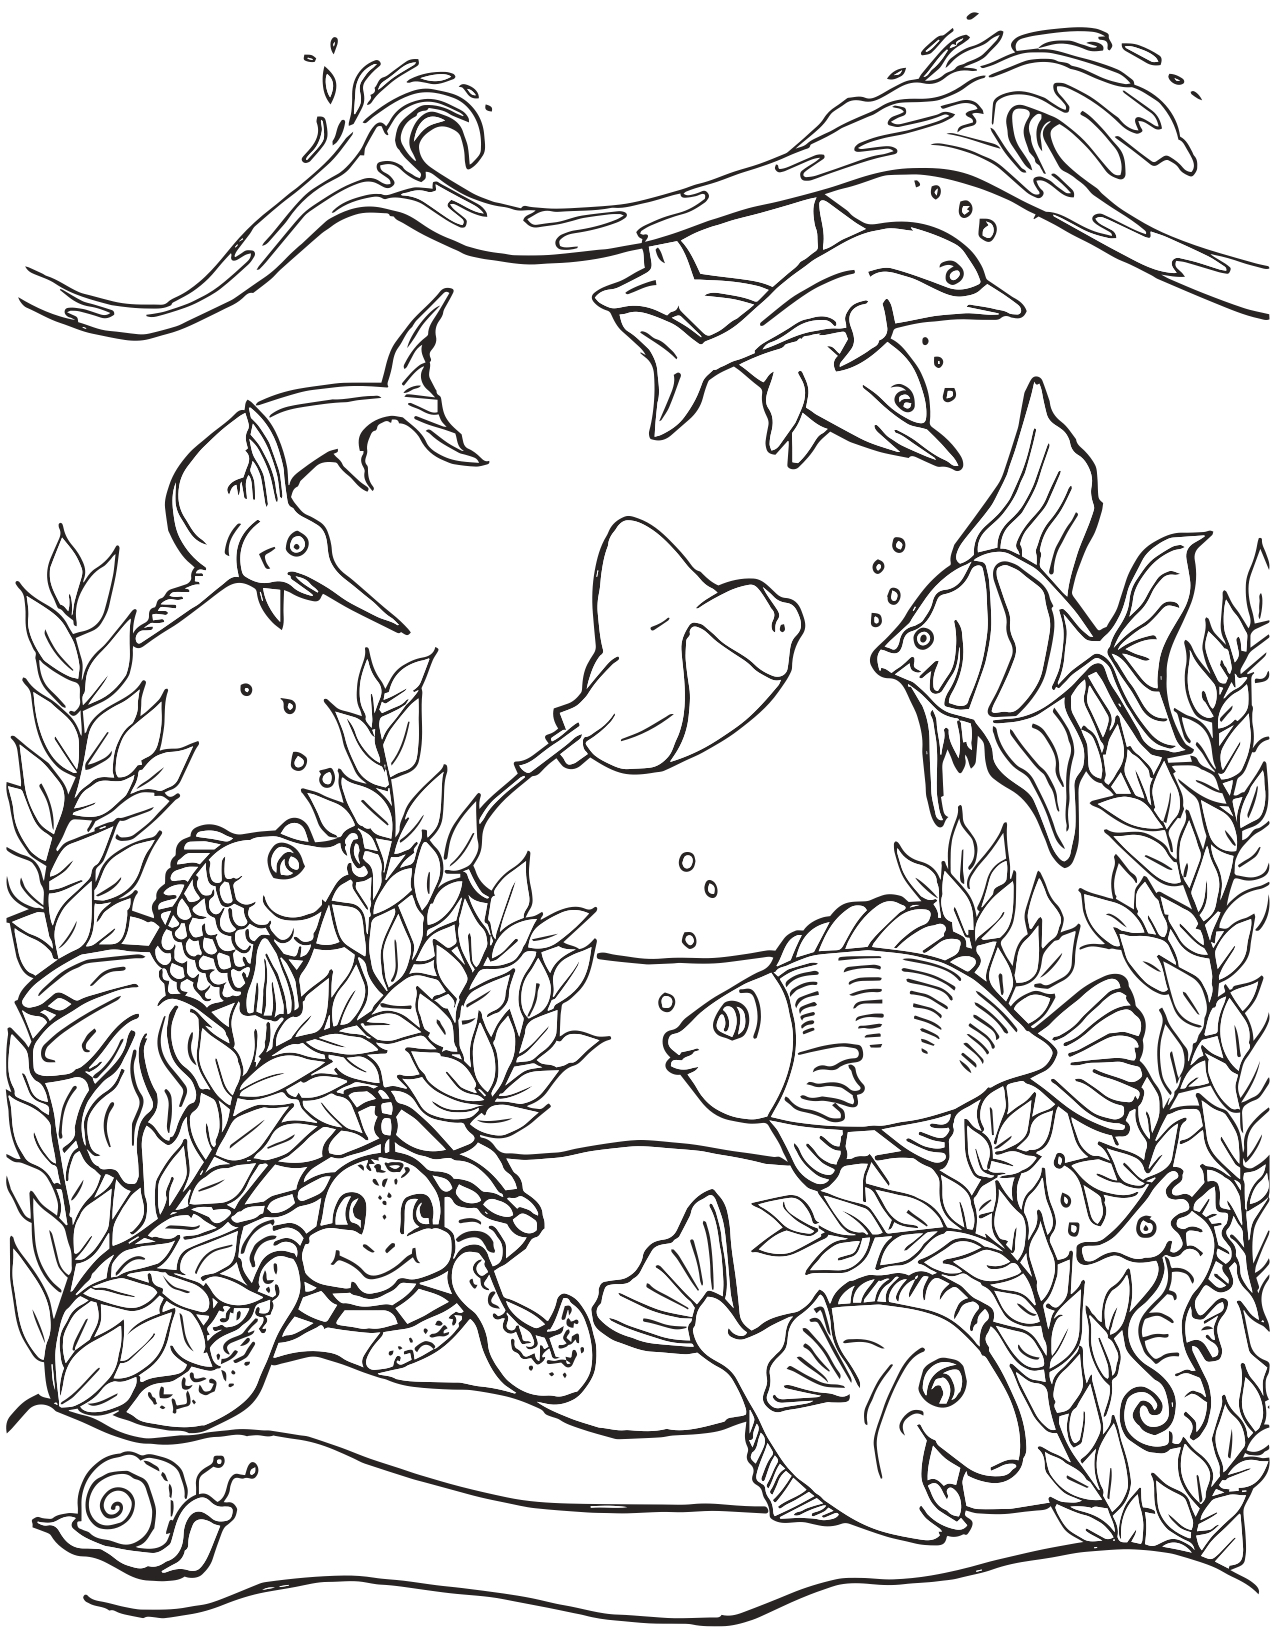 O Is For Ocean Coloring Page